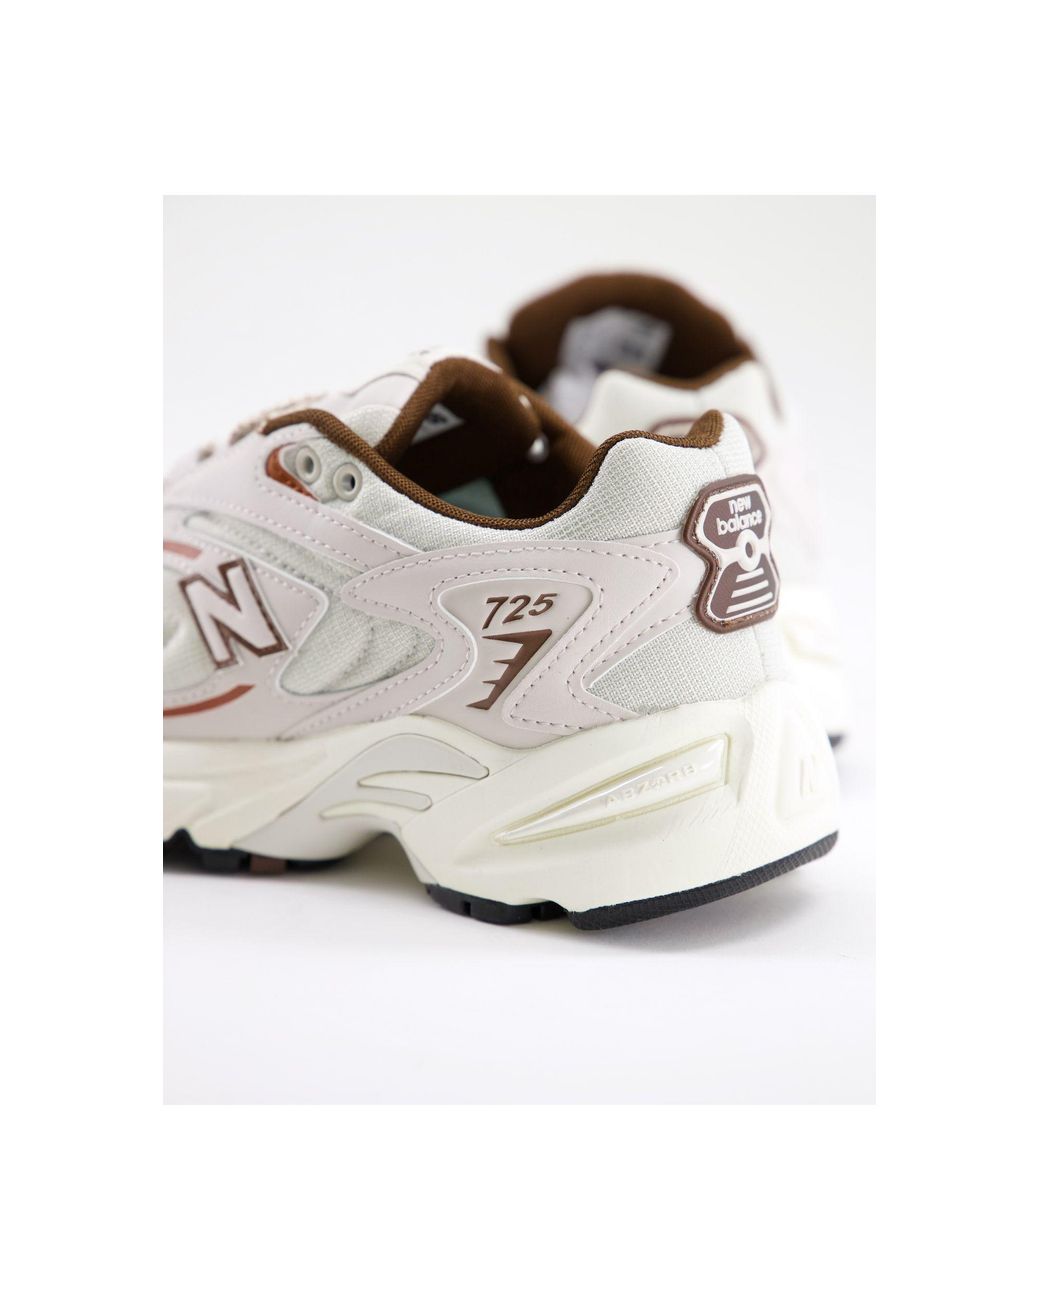 New Balance 725 Cookie Trainers | Lyst